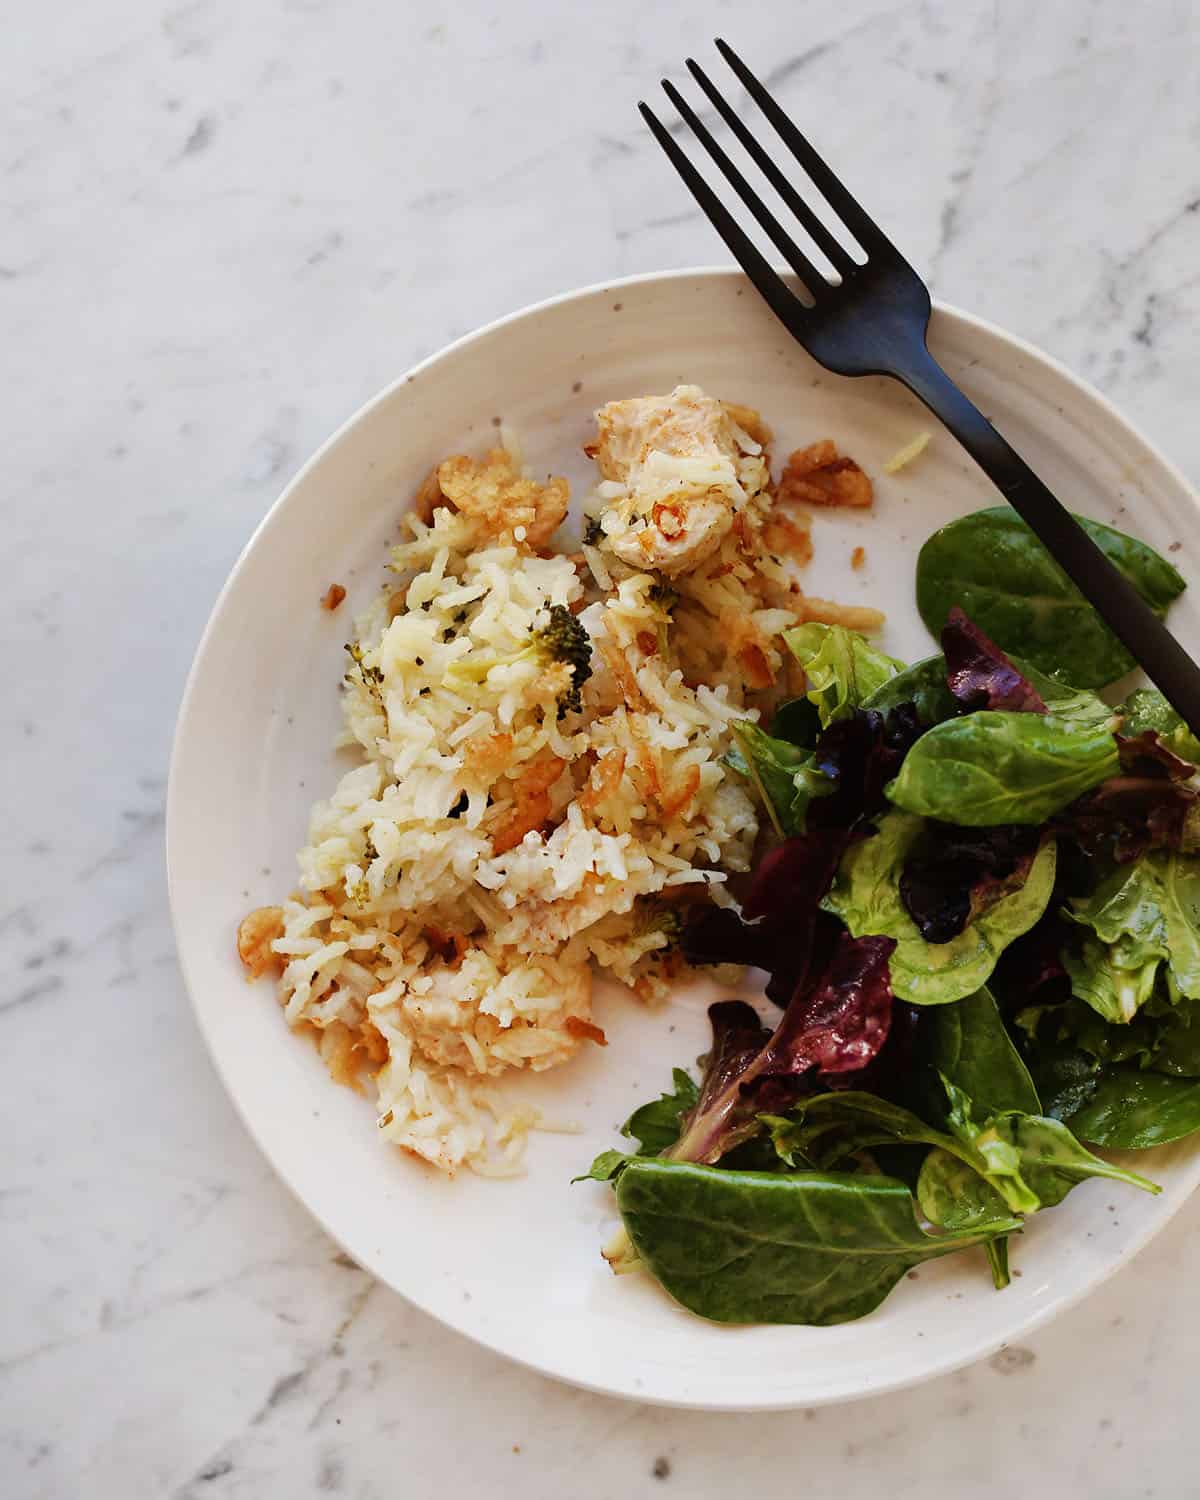 Chicken and rice with salad